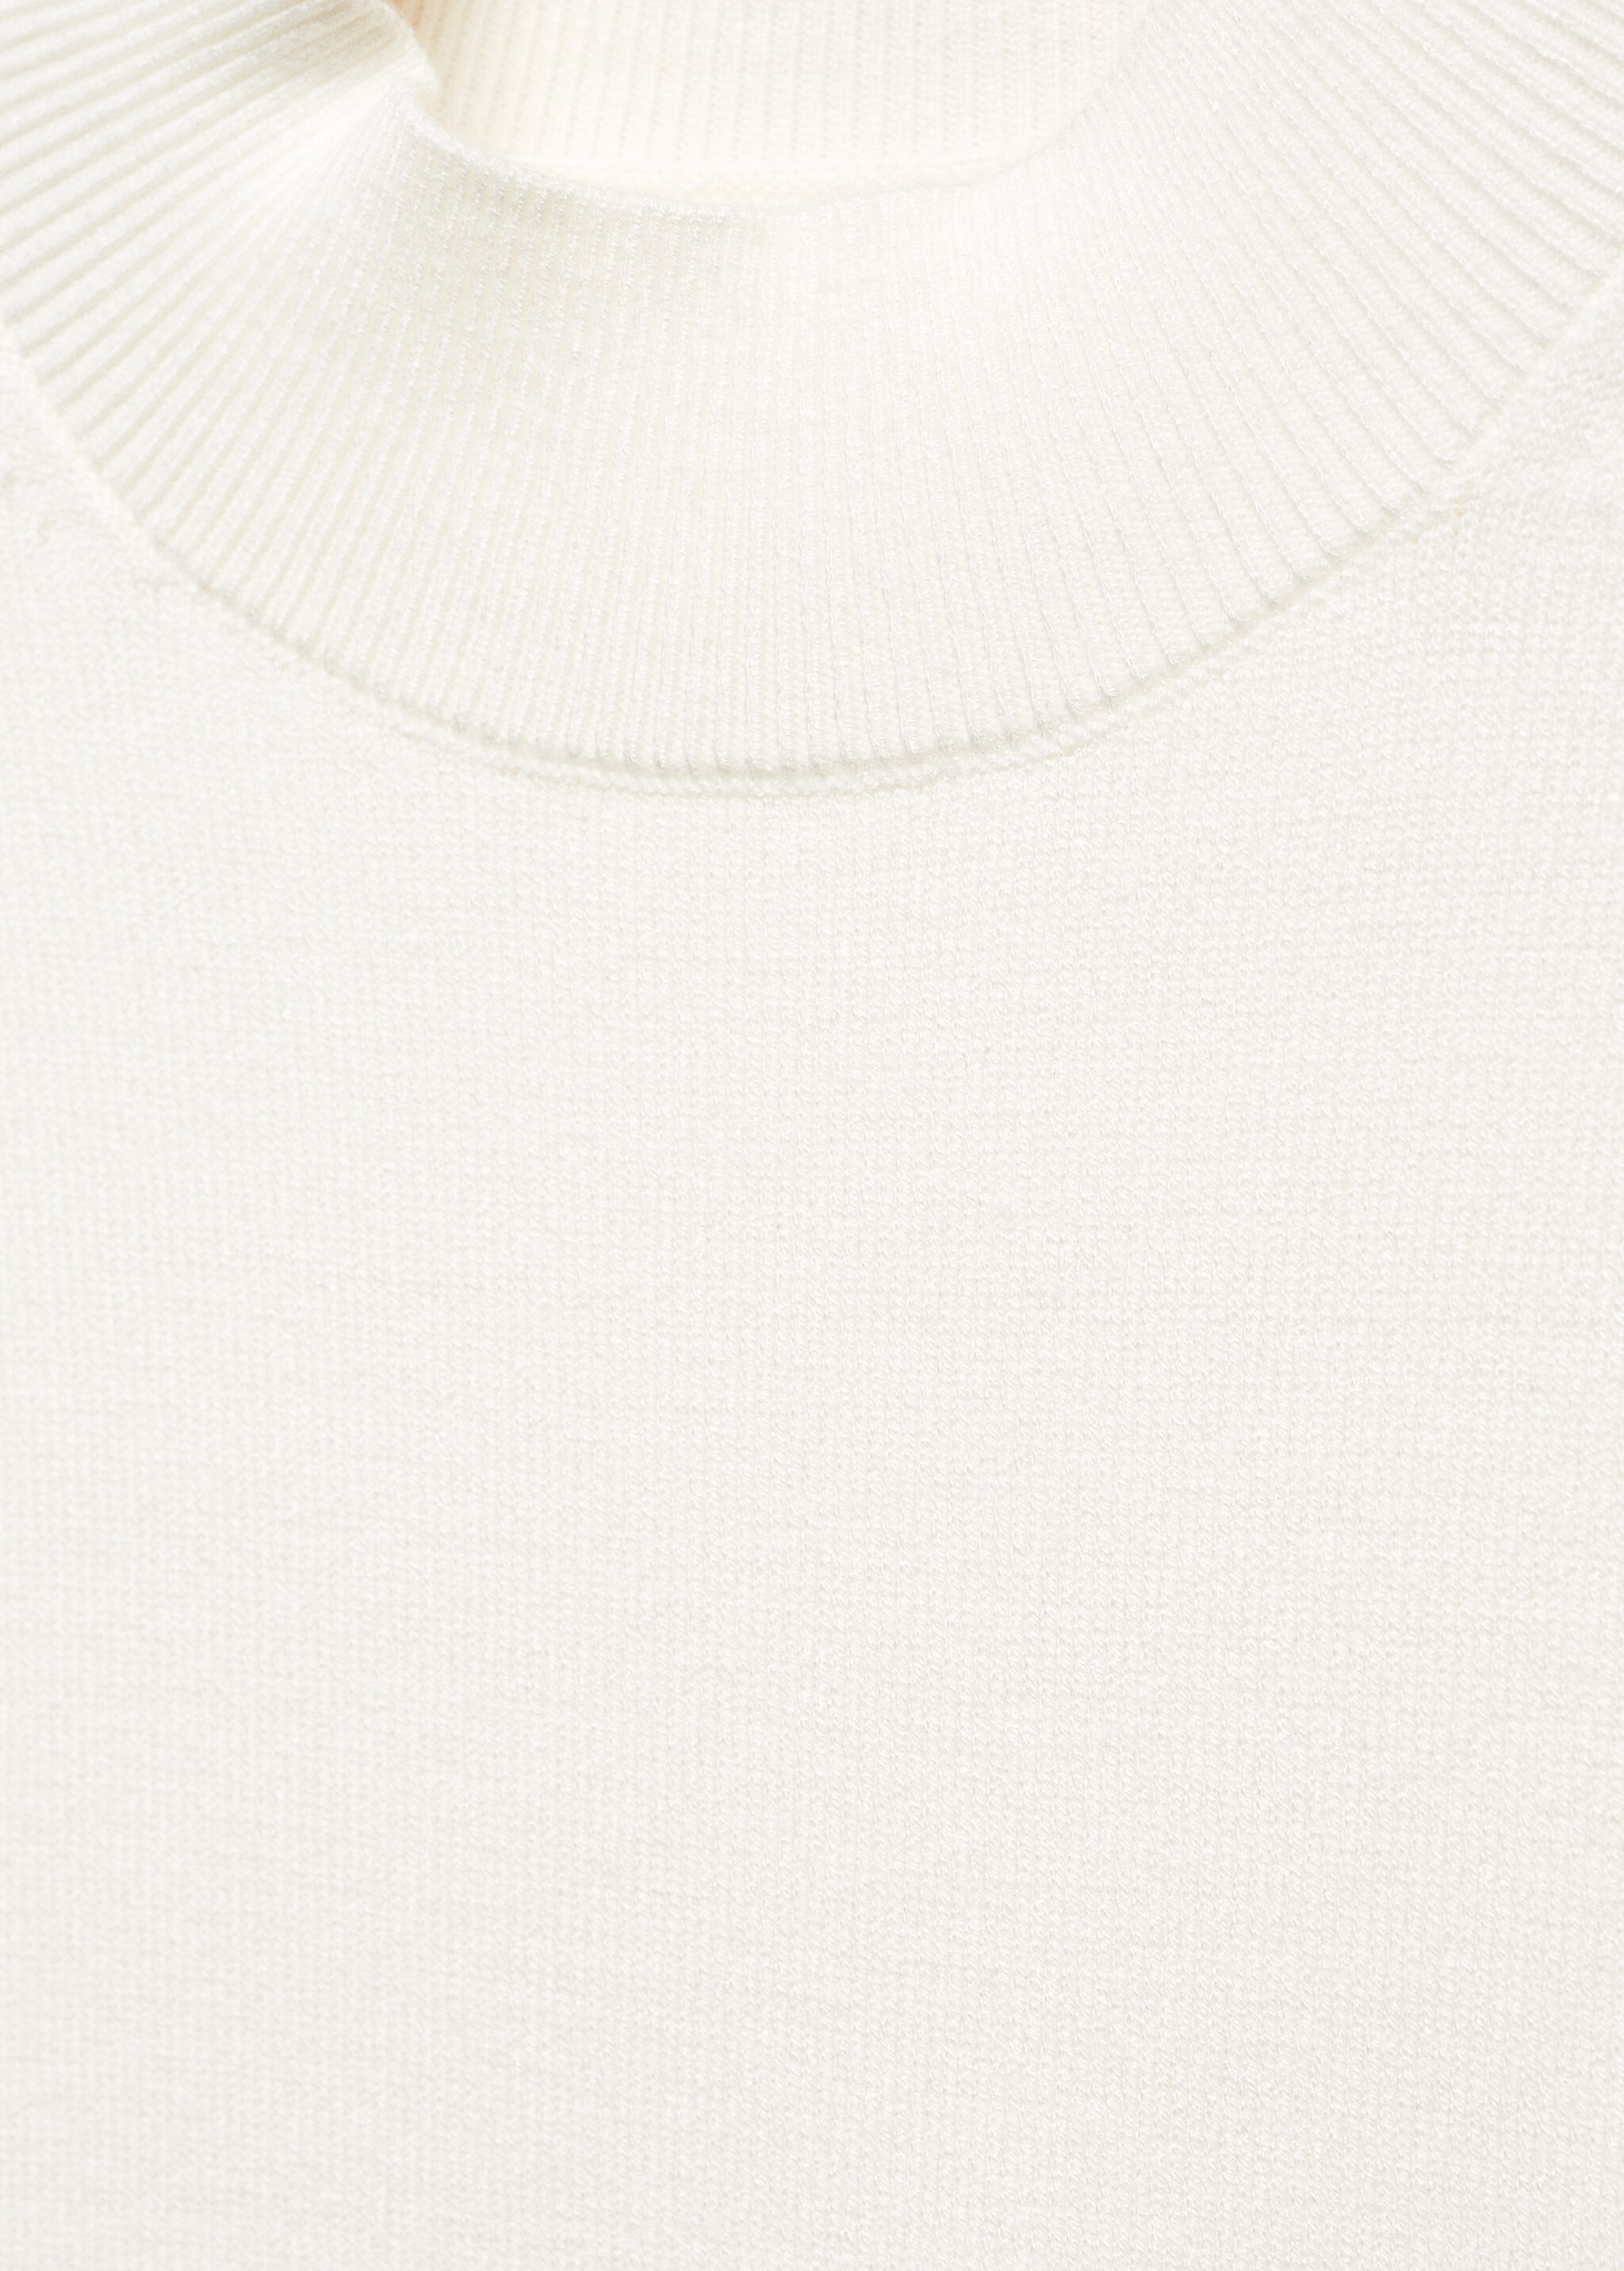 Perkins neck knitted sweater - Details of the article 8